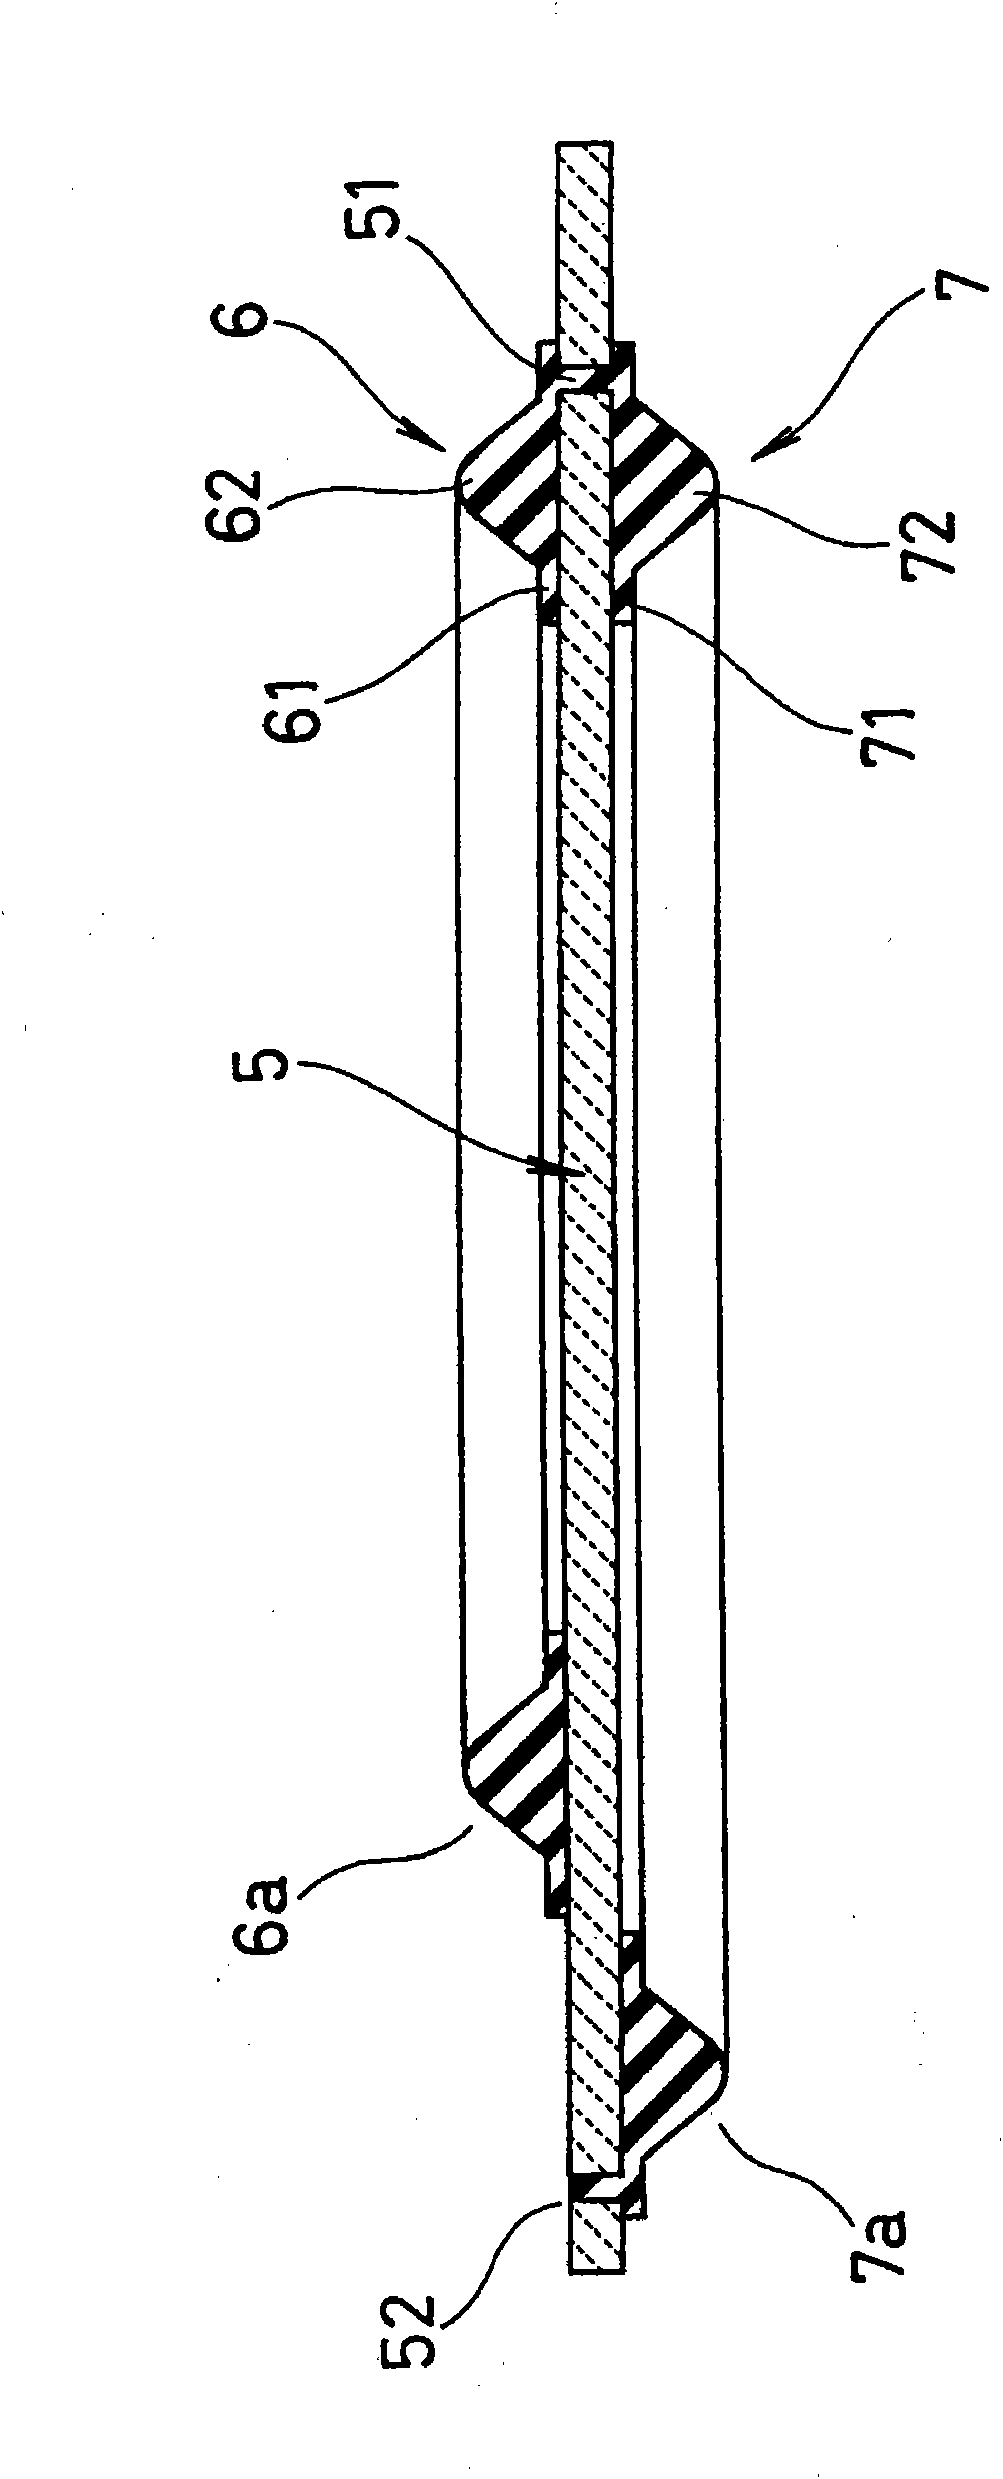 Seal component manufacturing method